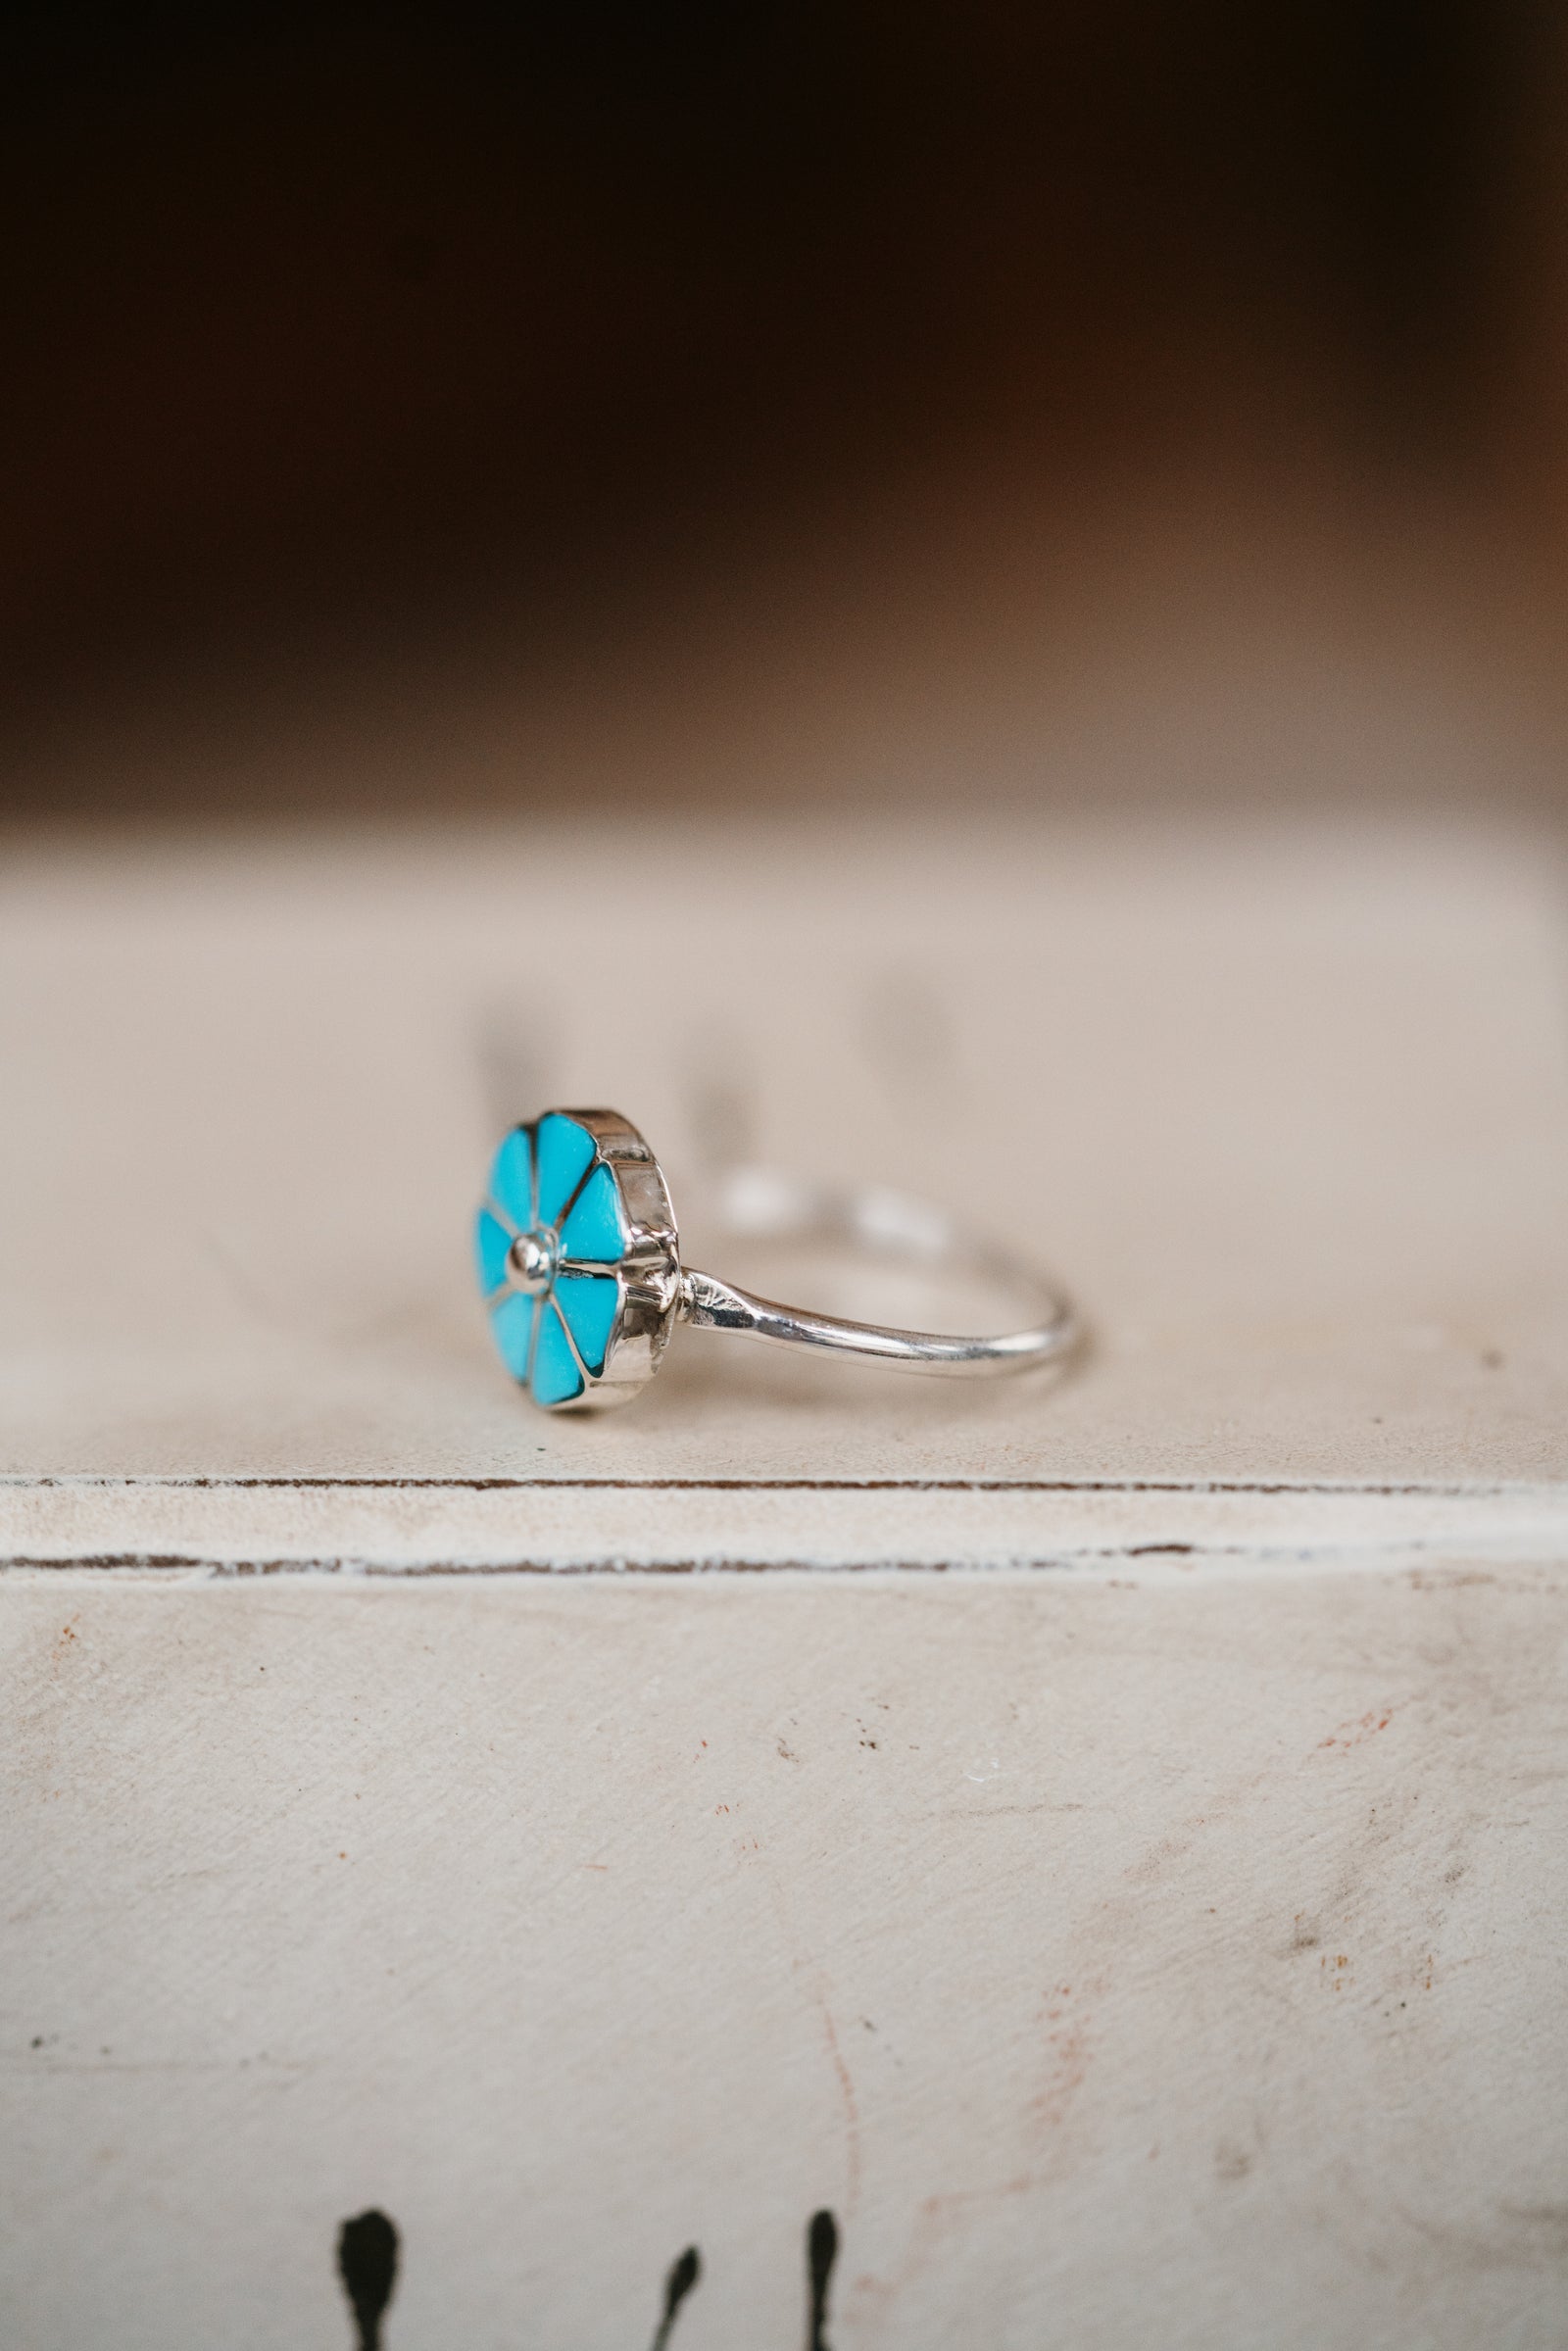 Queensland Flower Ring | Turquoise